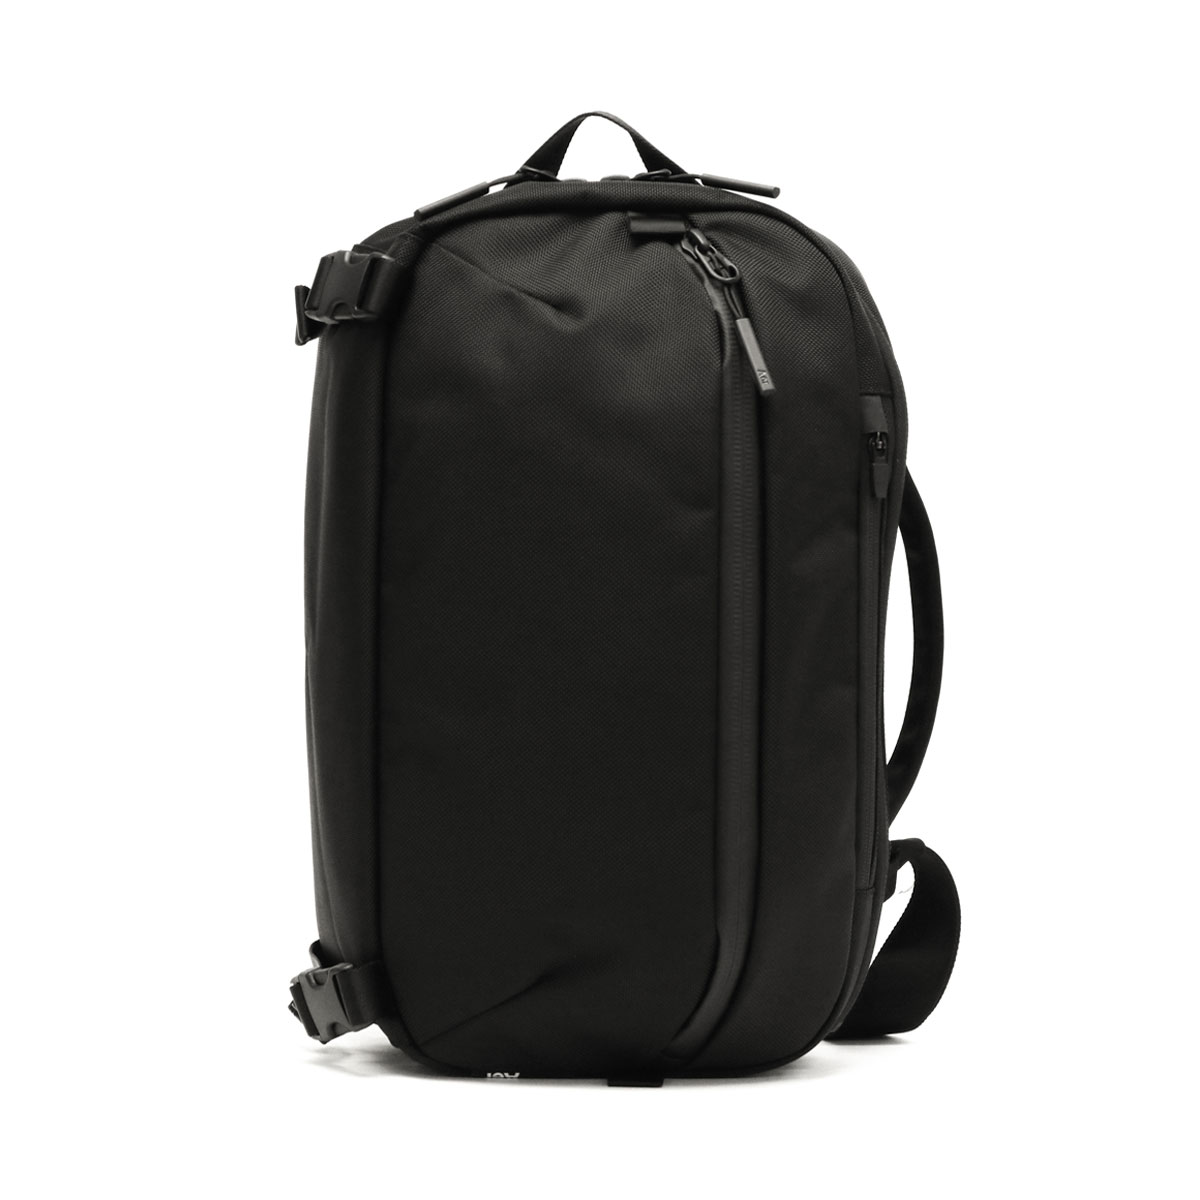 Aer エアー Travel Collection Travel Sling 2 ボディバッグ 12L